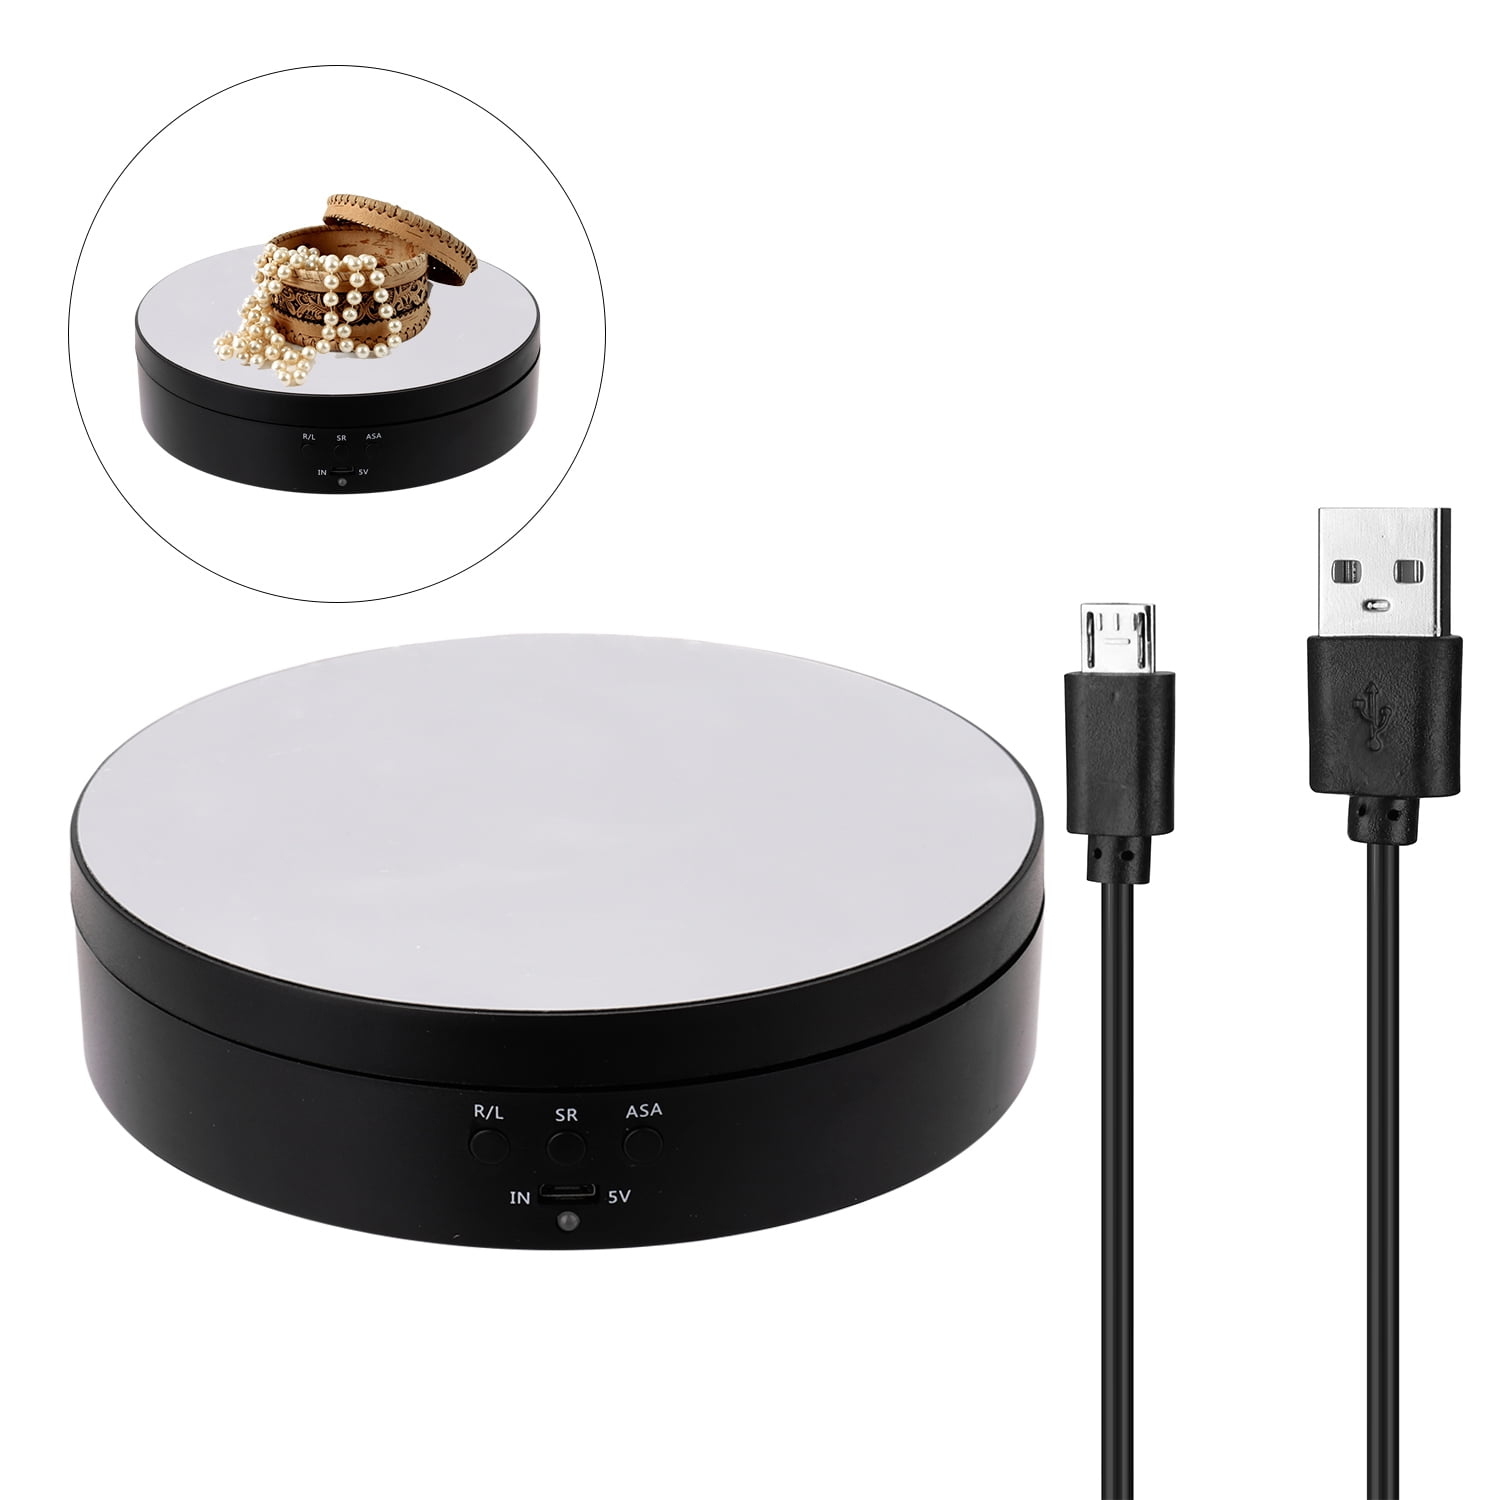 Battery Powered Turntable 360° Rotating Stand for Model Action Figures  Jewelry or Small Items Display